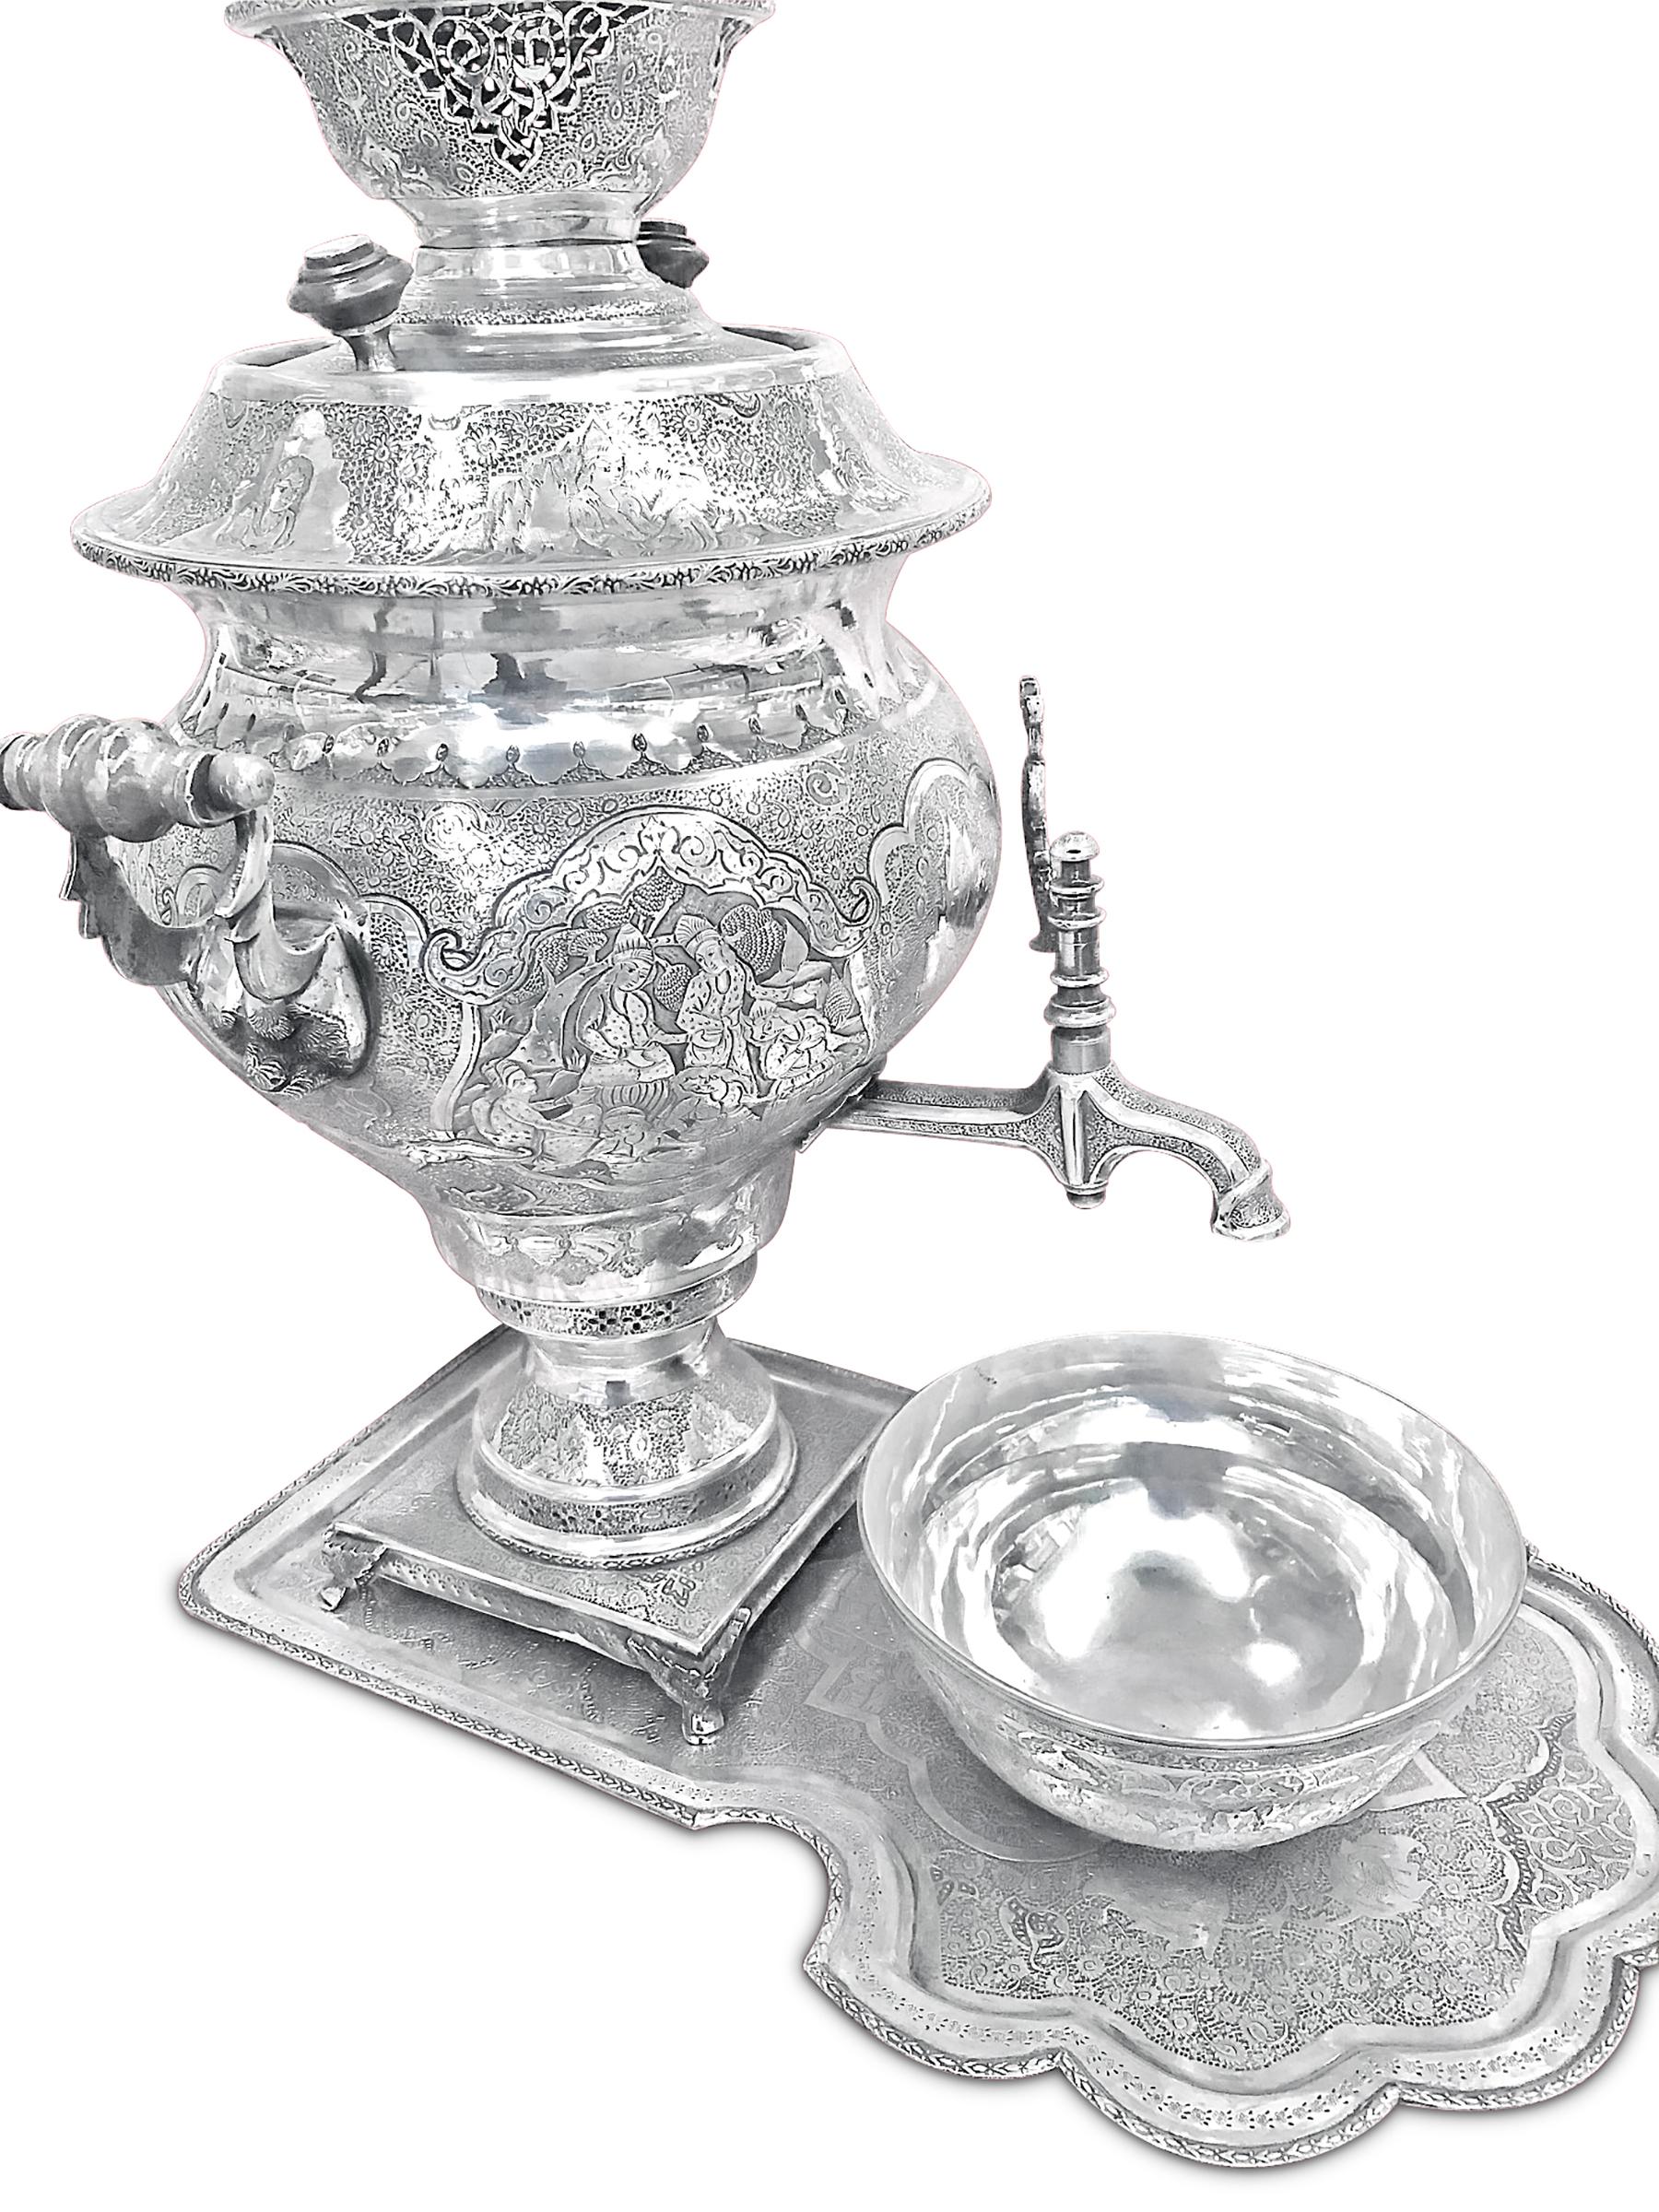 Collectible 1920s Silver Samavar from Iran Handcrafted &handCarved .Rare Piece 3